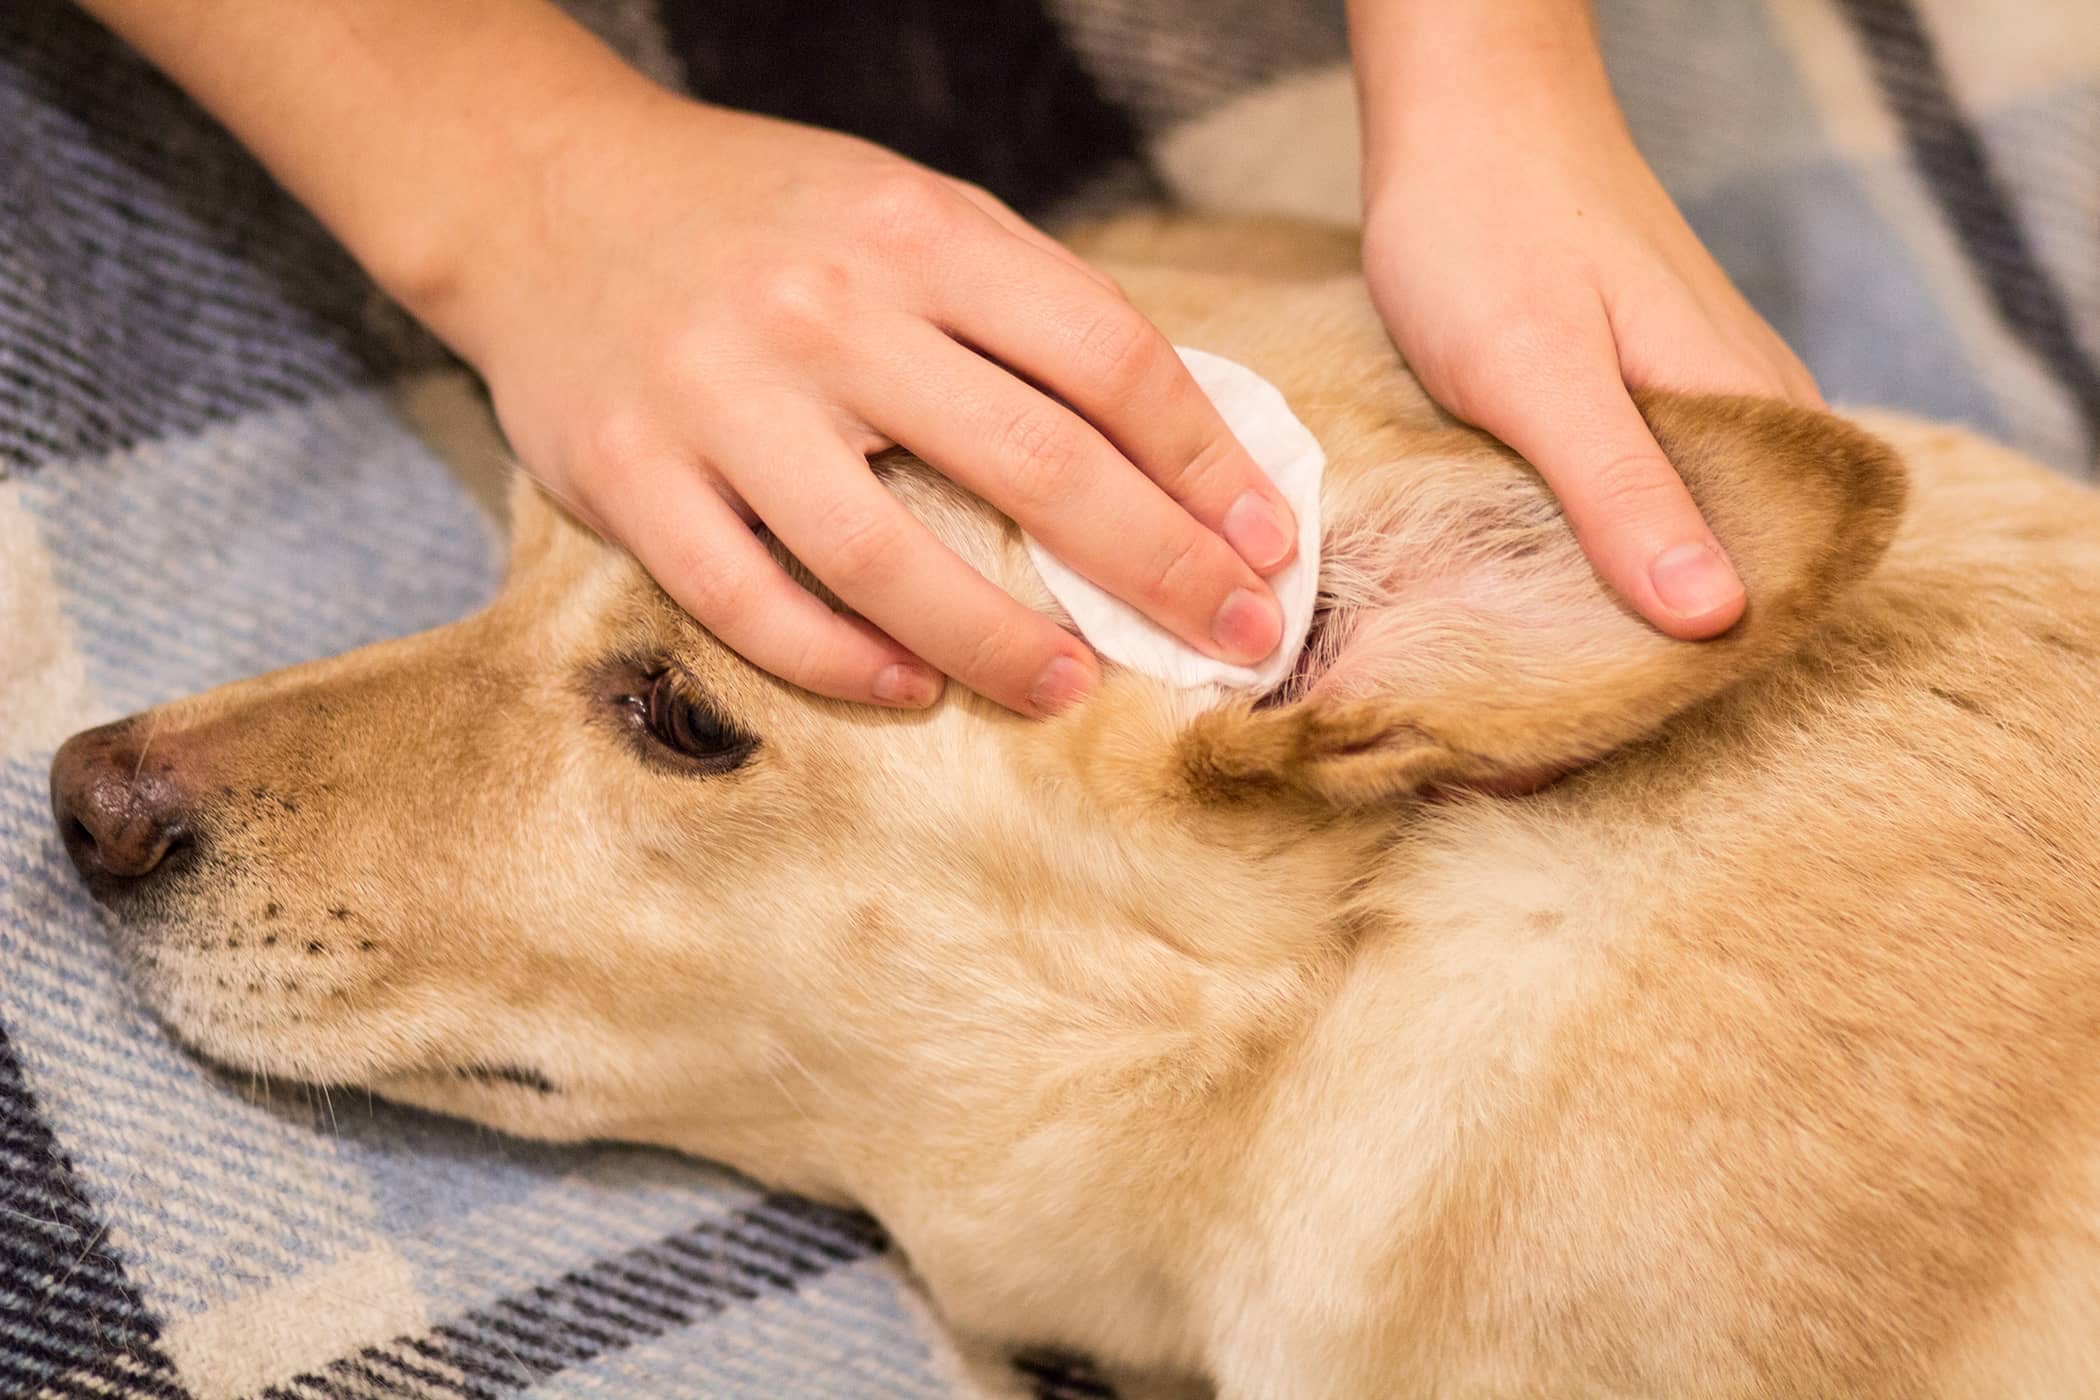 How To Use Apple Cider Vinegar For Dog Ear Infection